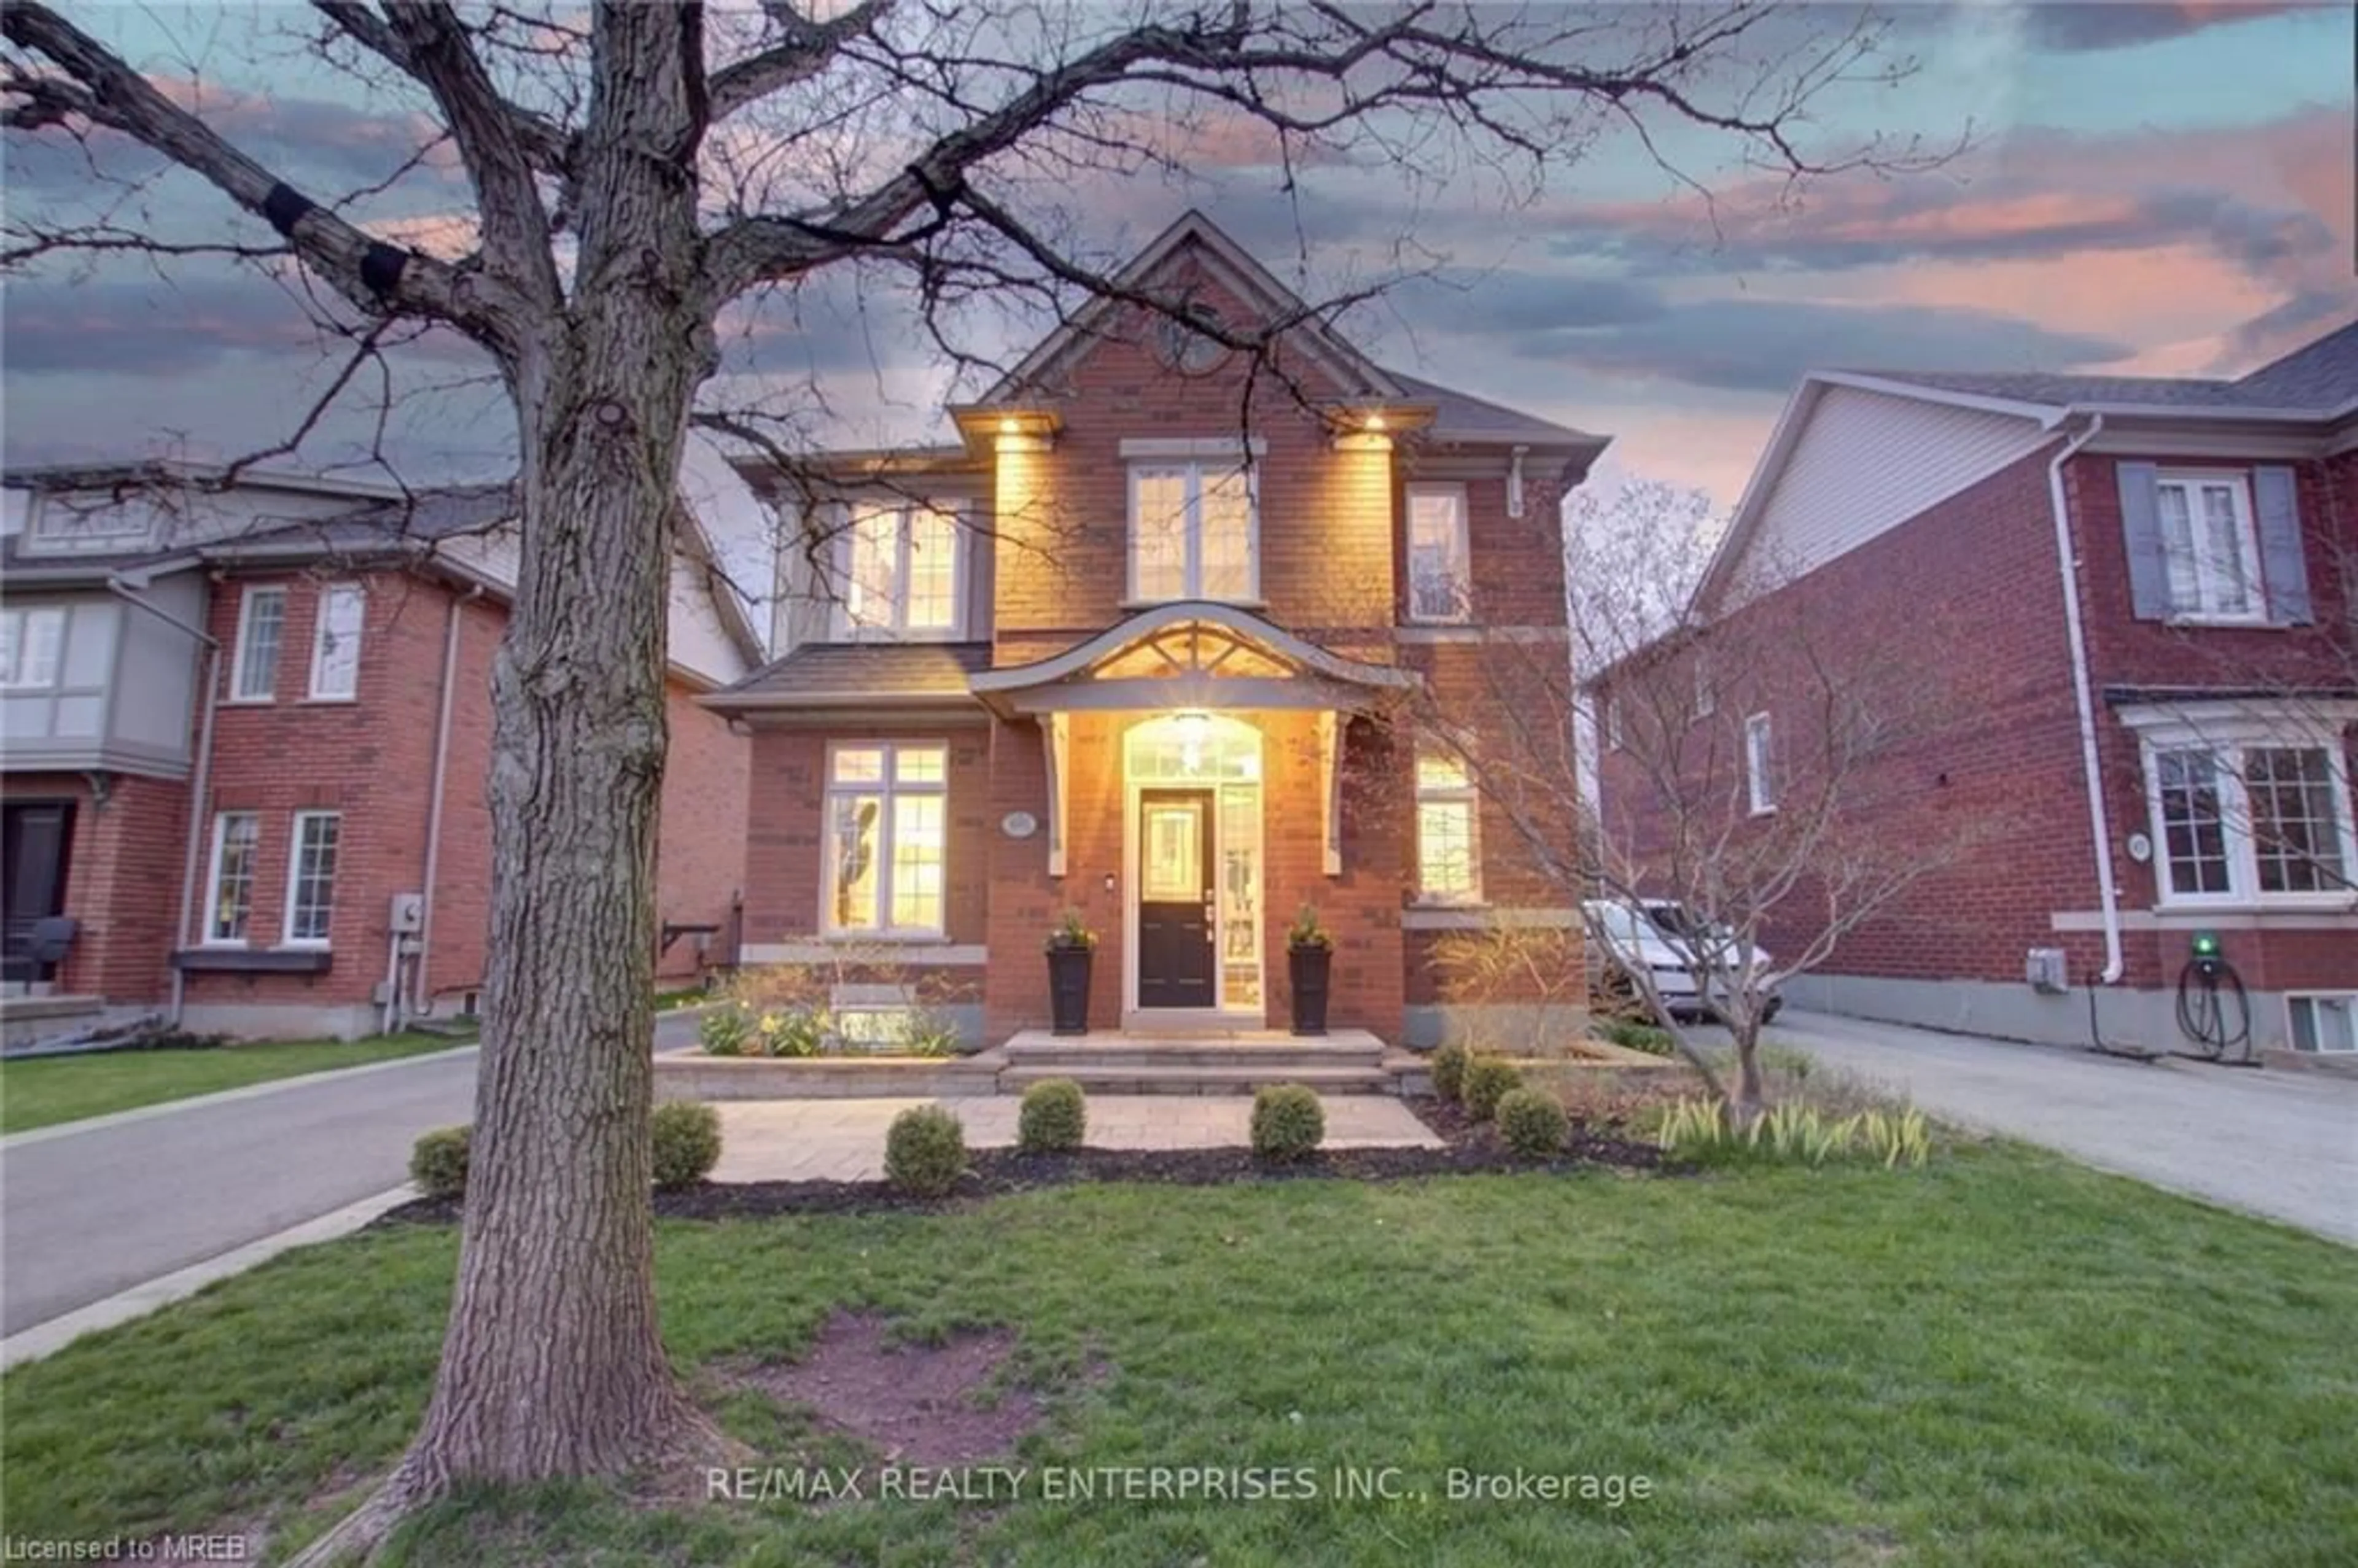 Home with brick exterior material for 441 Ambleside Dr, Oakville Ontario L6H 6N7